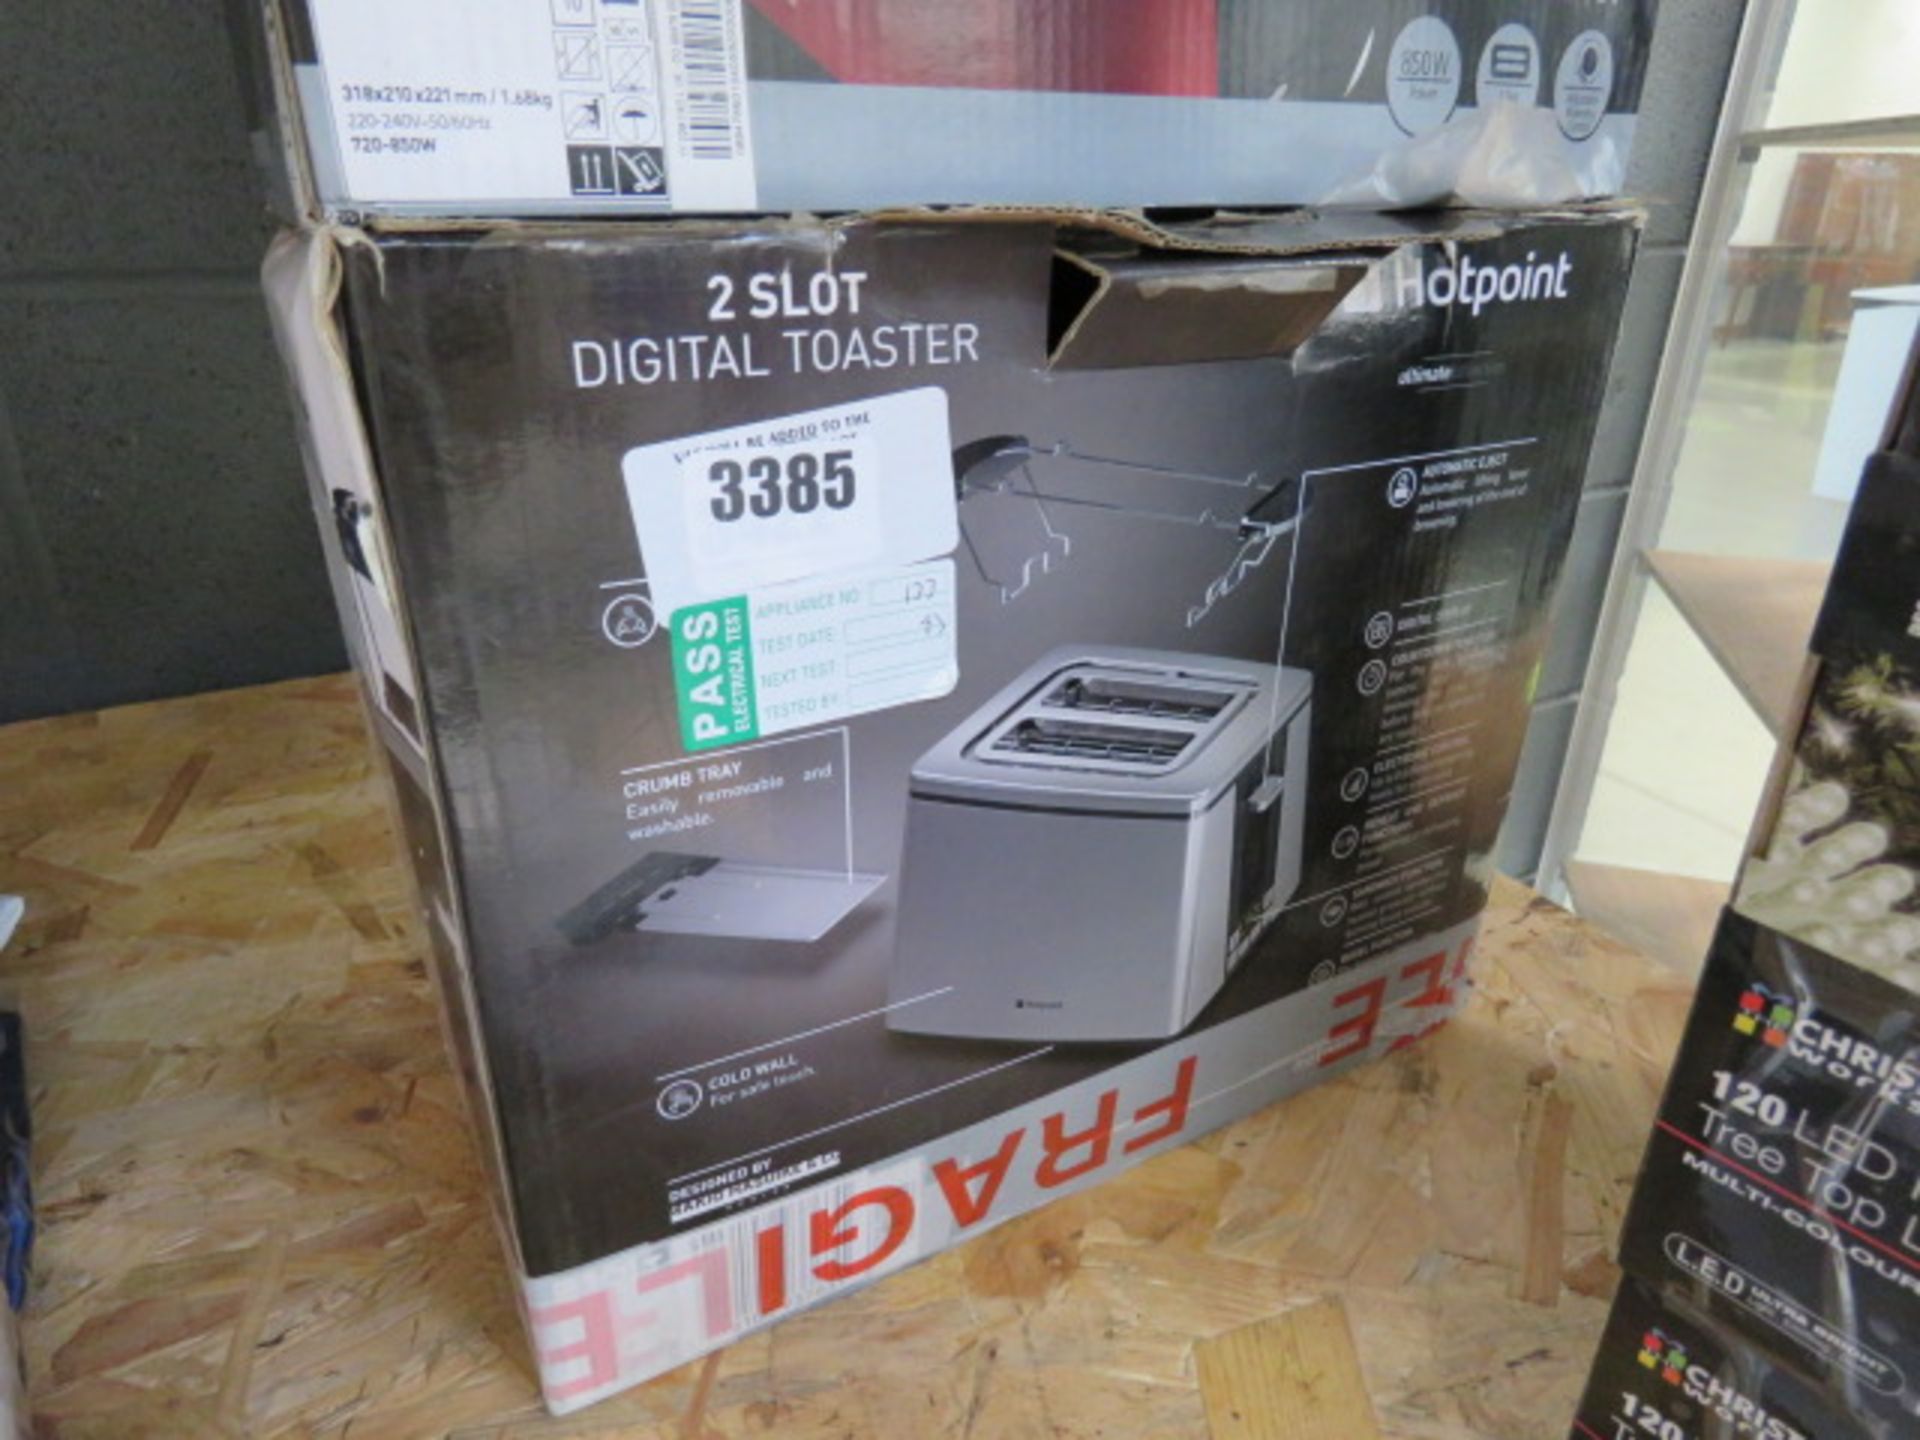 3422 - Boxed Hotpoint 2 slice toaster